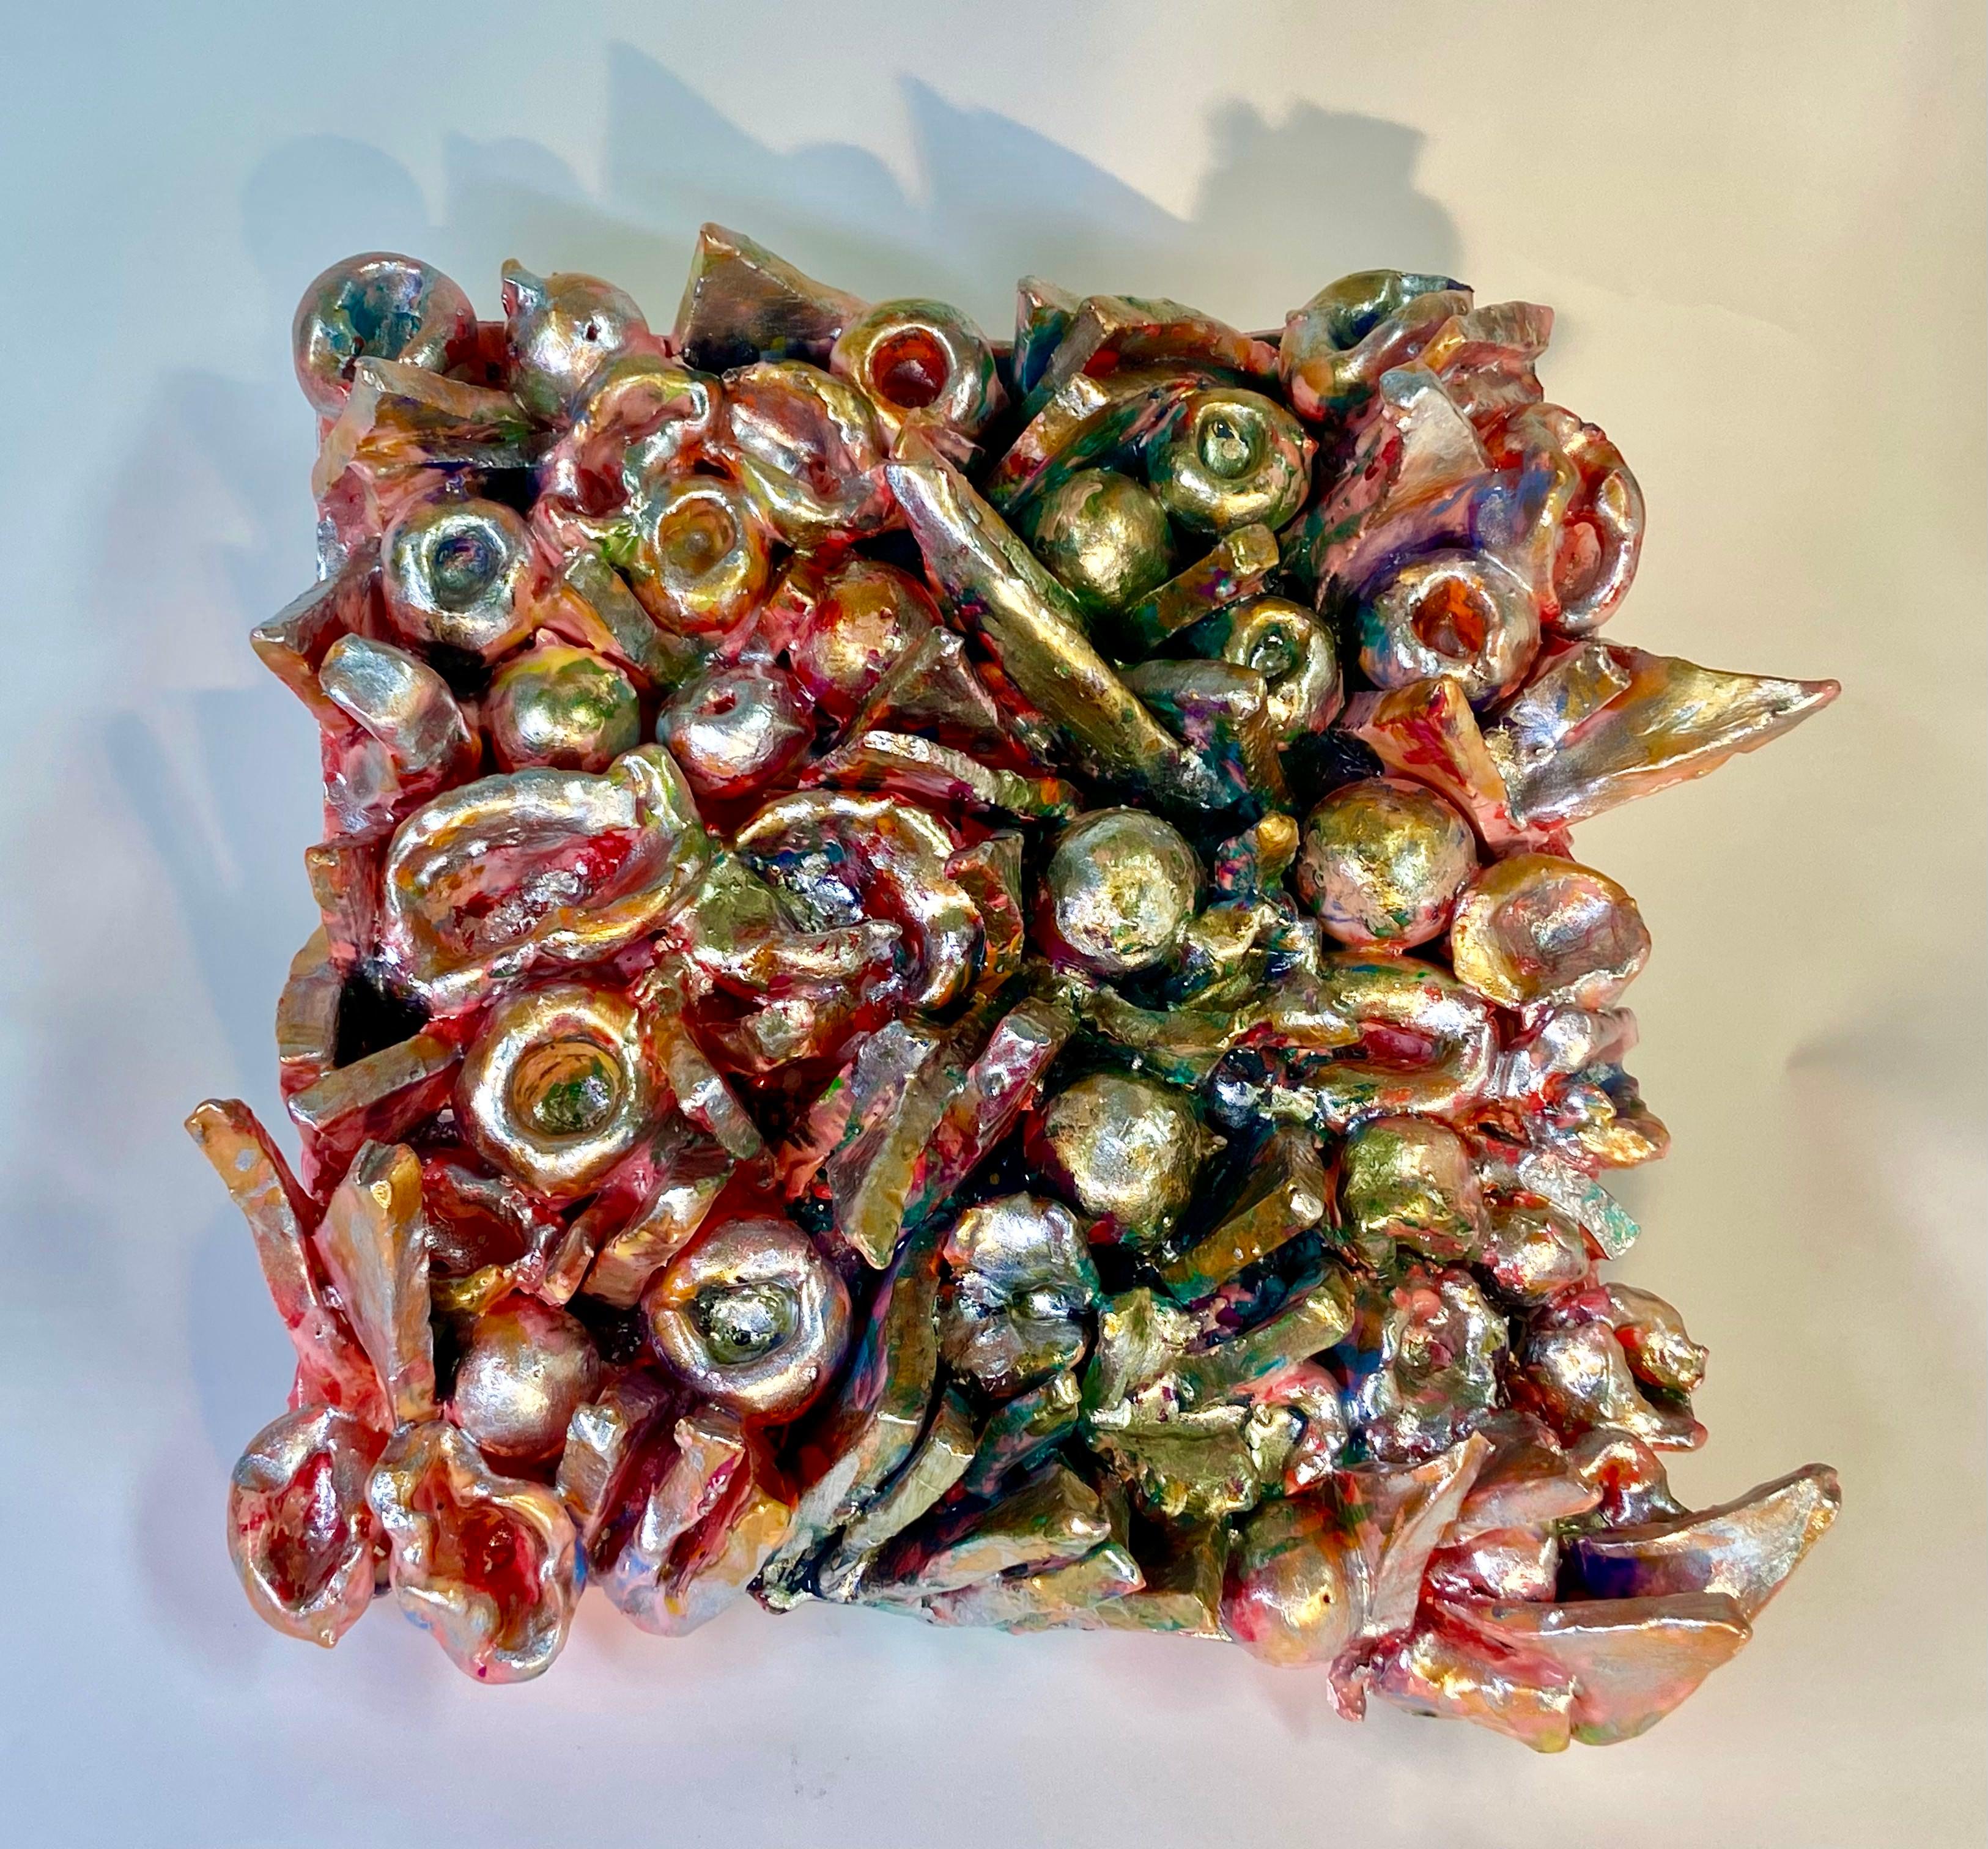 Charo Oquet Abstract Sculpture - Untitled XXVII. Glazed ceramic abstract sculpture